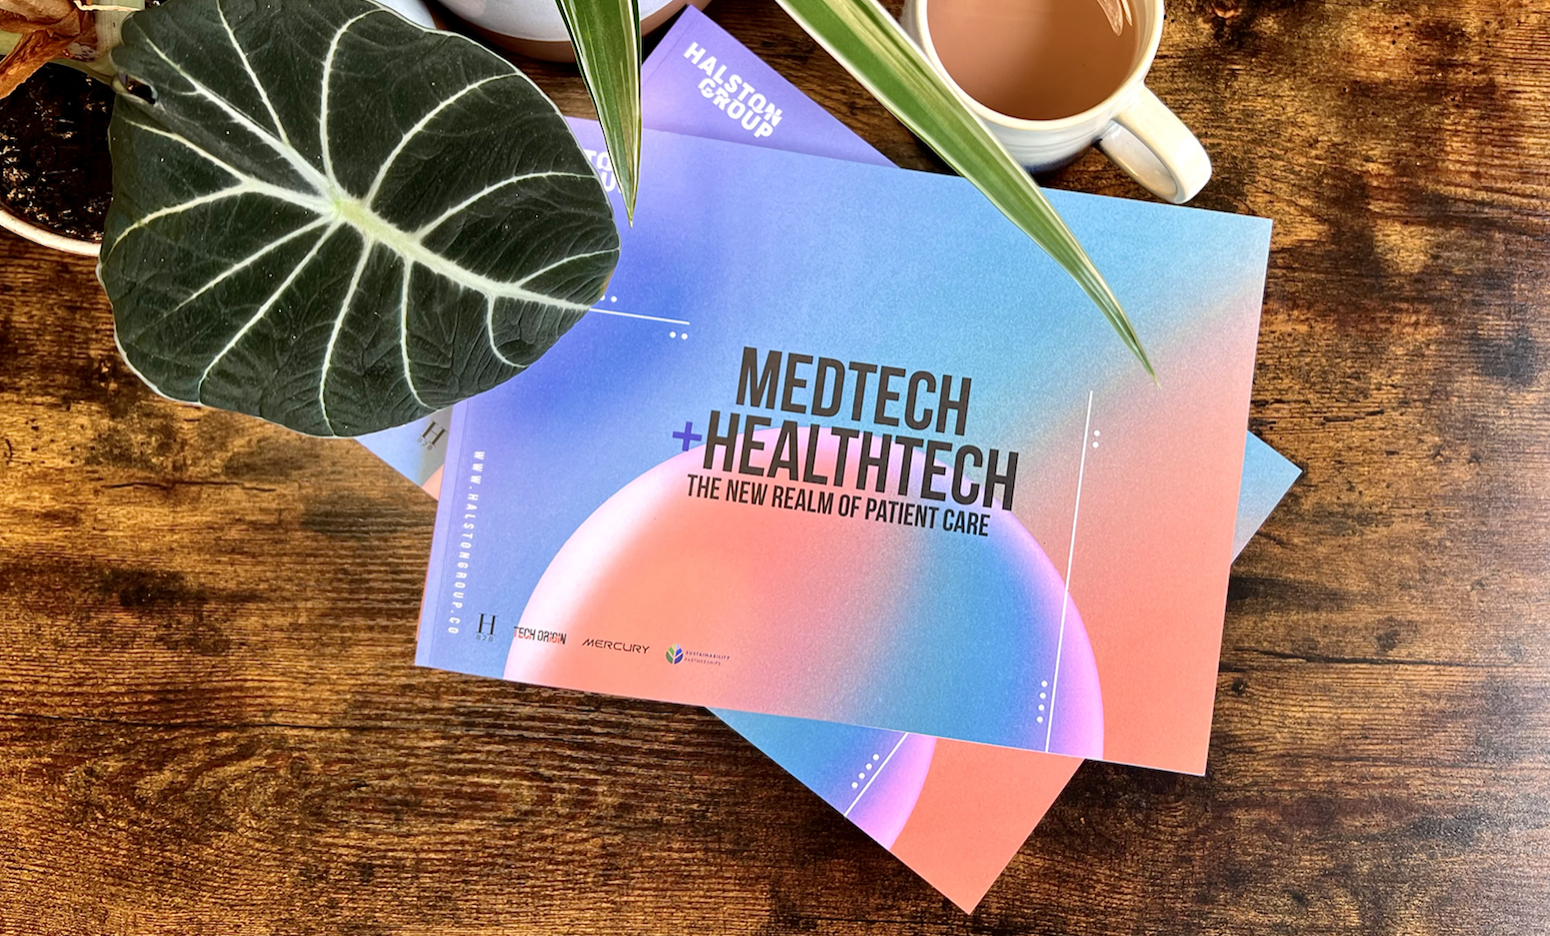 MedTech leaders collaborate on investigative industry report